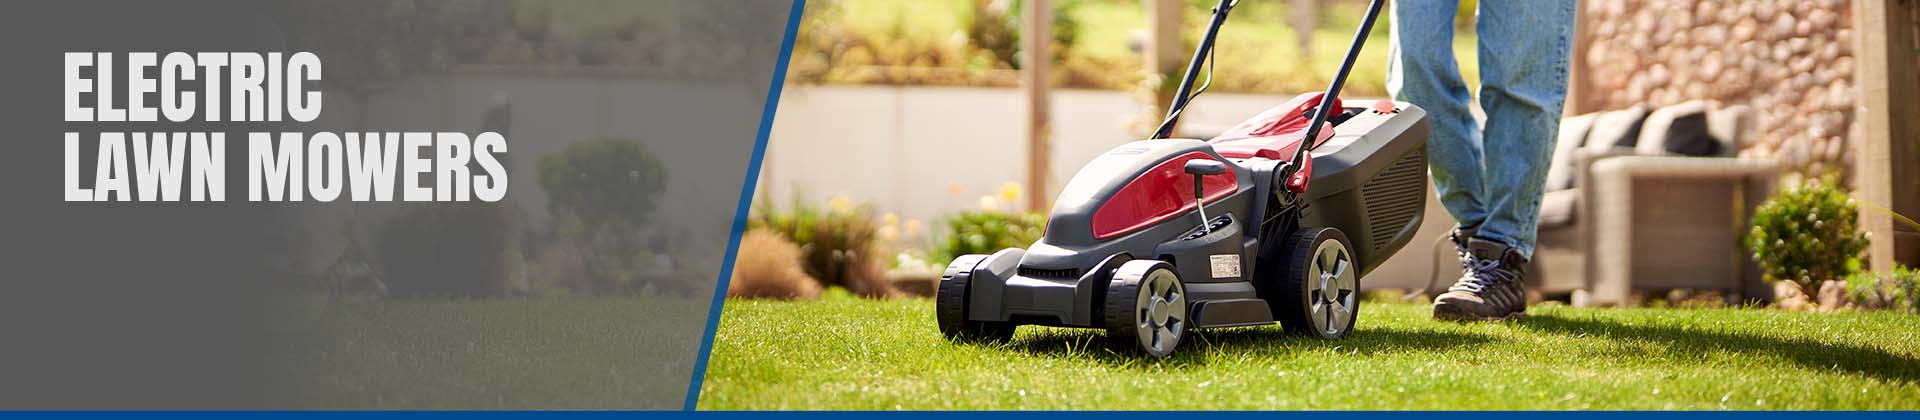 Electric Lawn Mowers - SHOP NOW